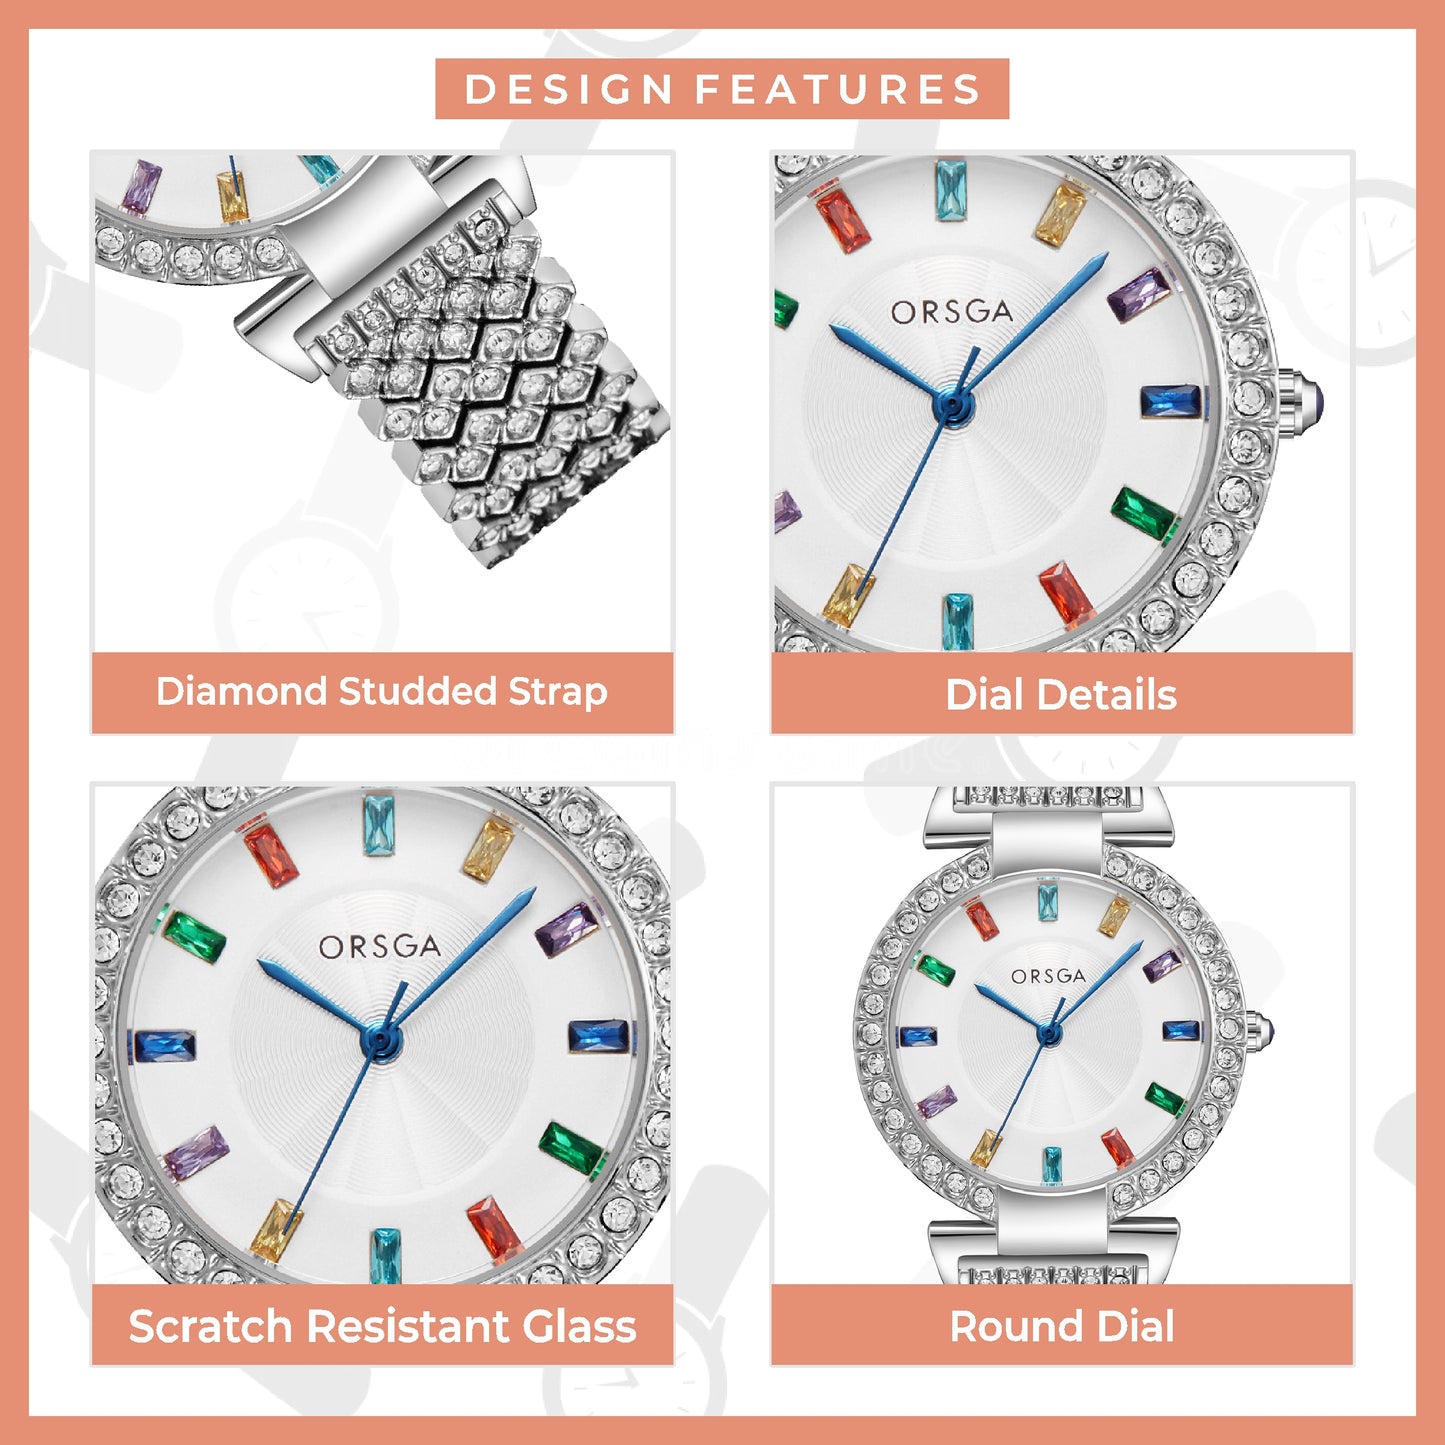 SERENE Women Watch - White Dial Studded Silver